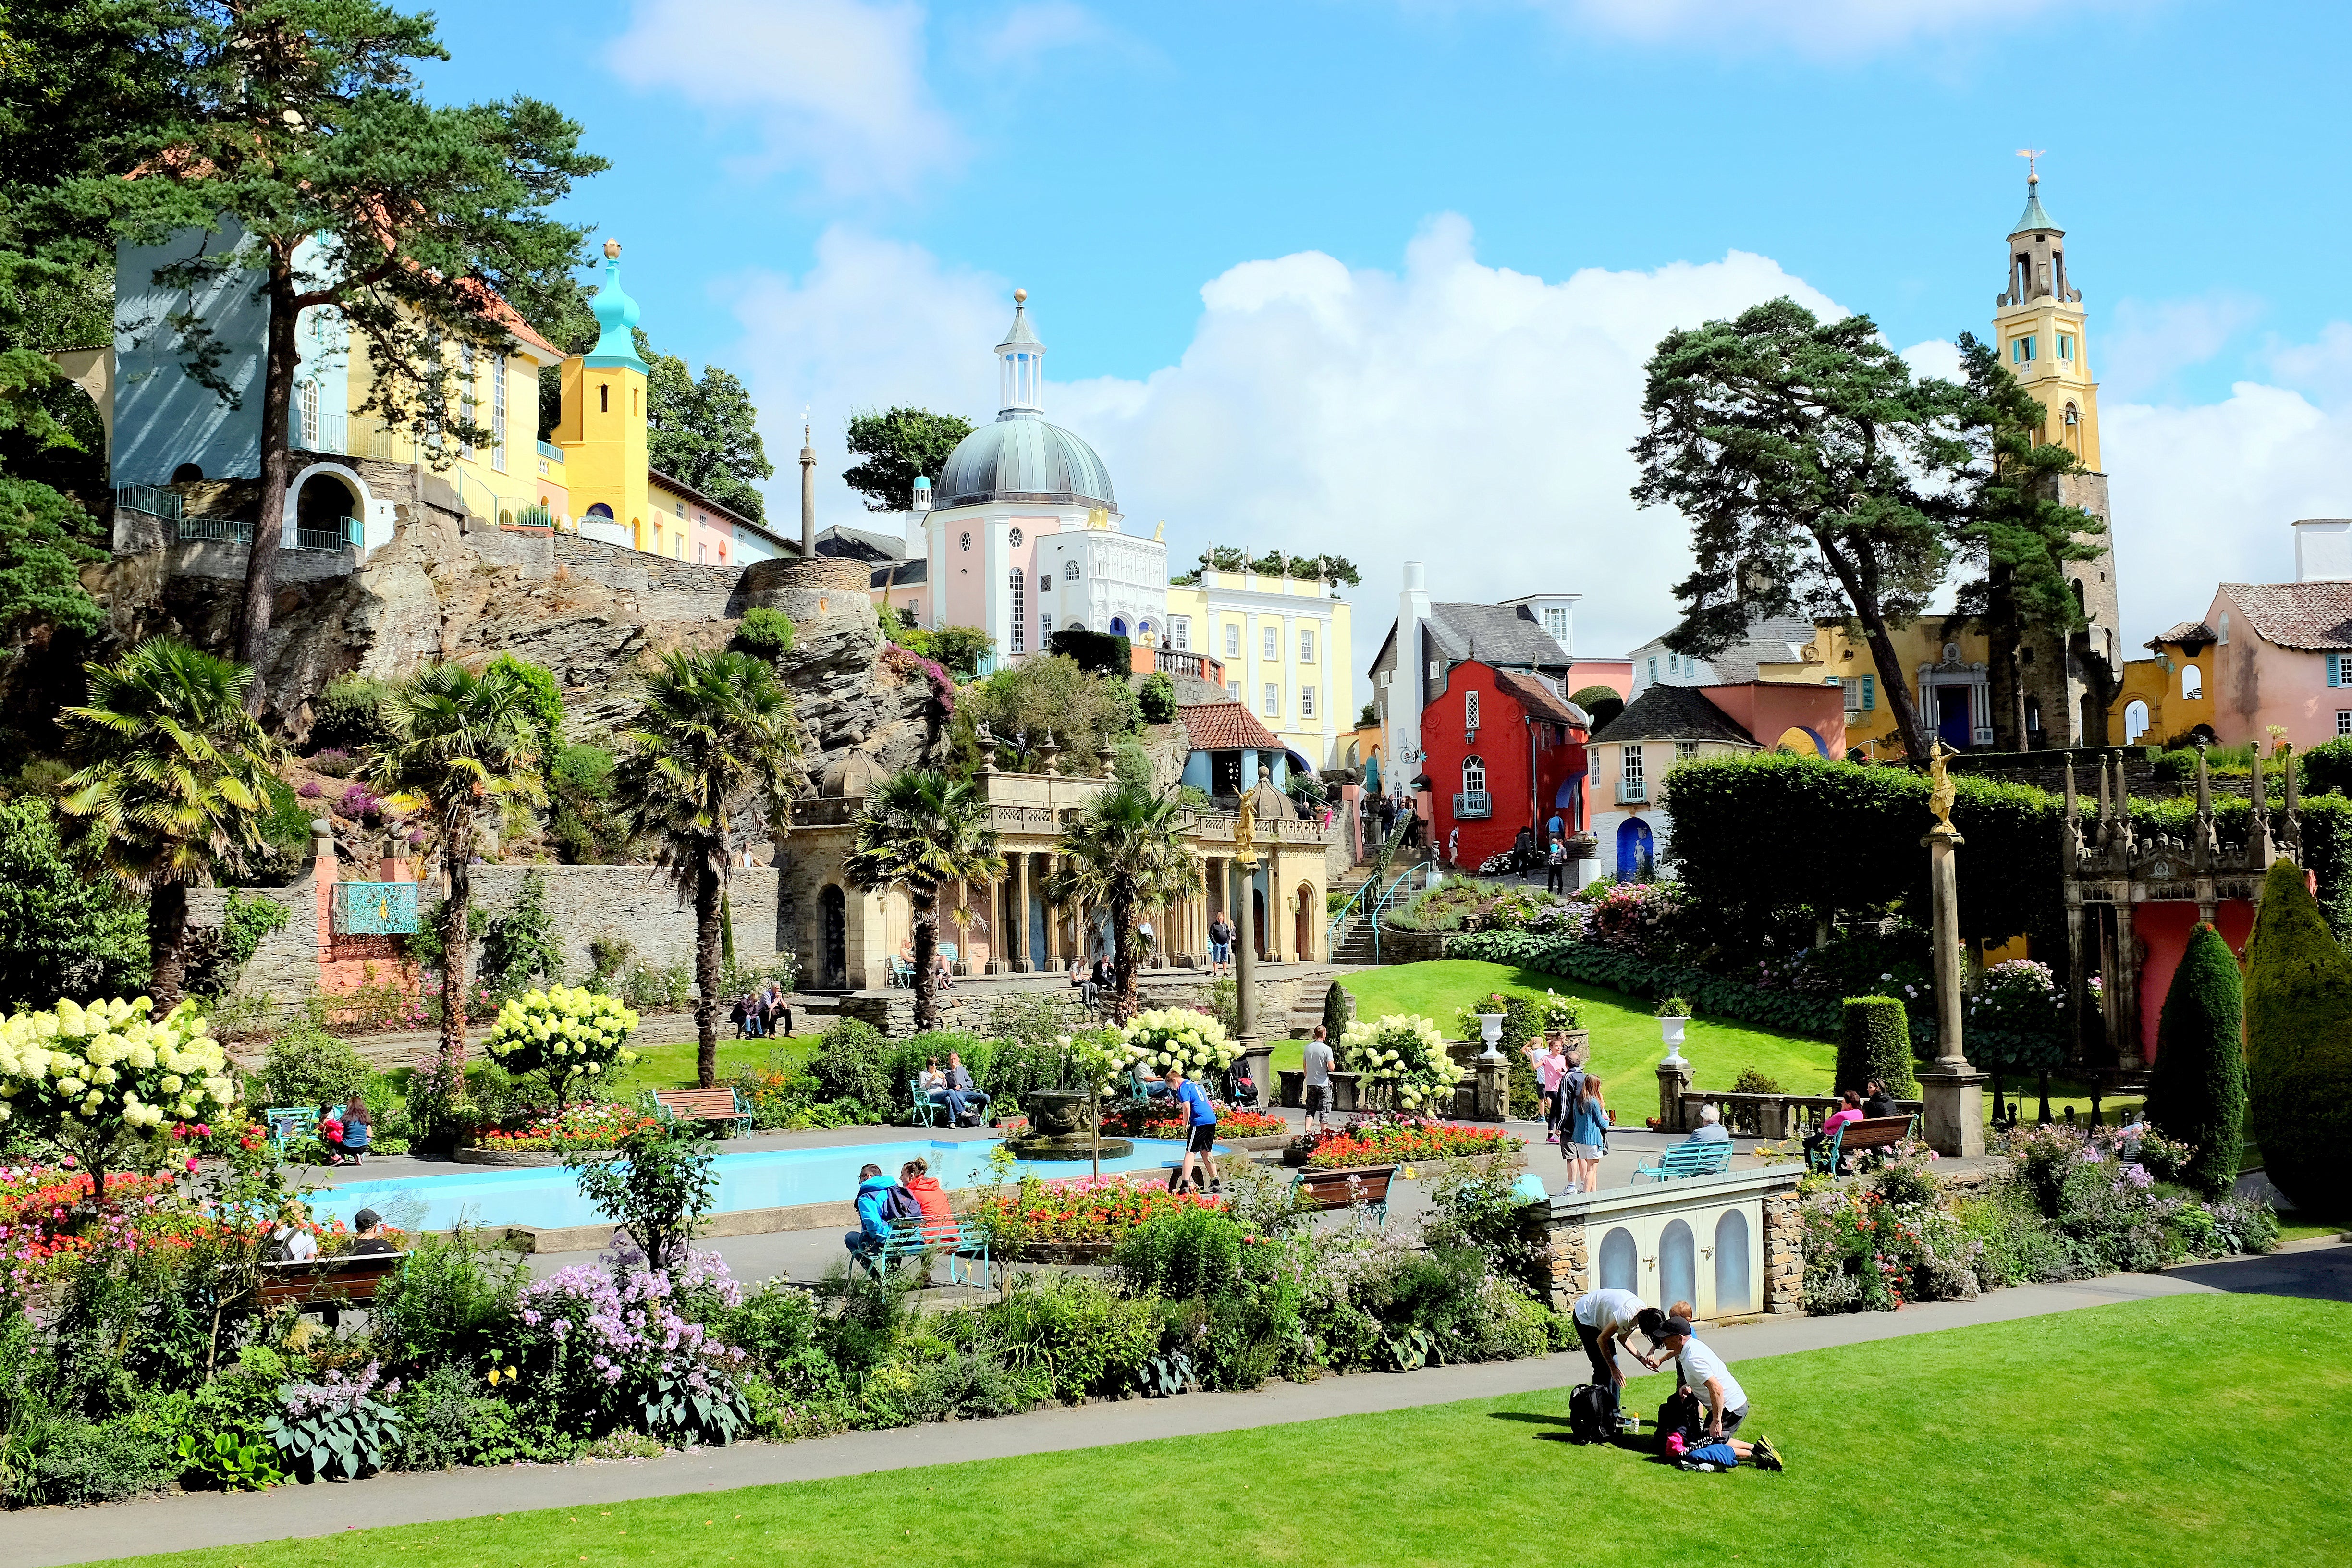 Take in the colourful sight of Portmeirion’s village gardens